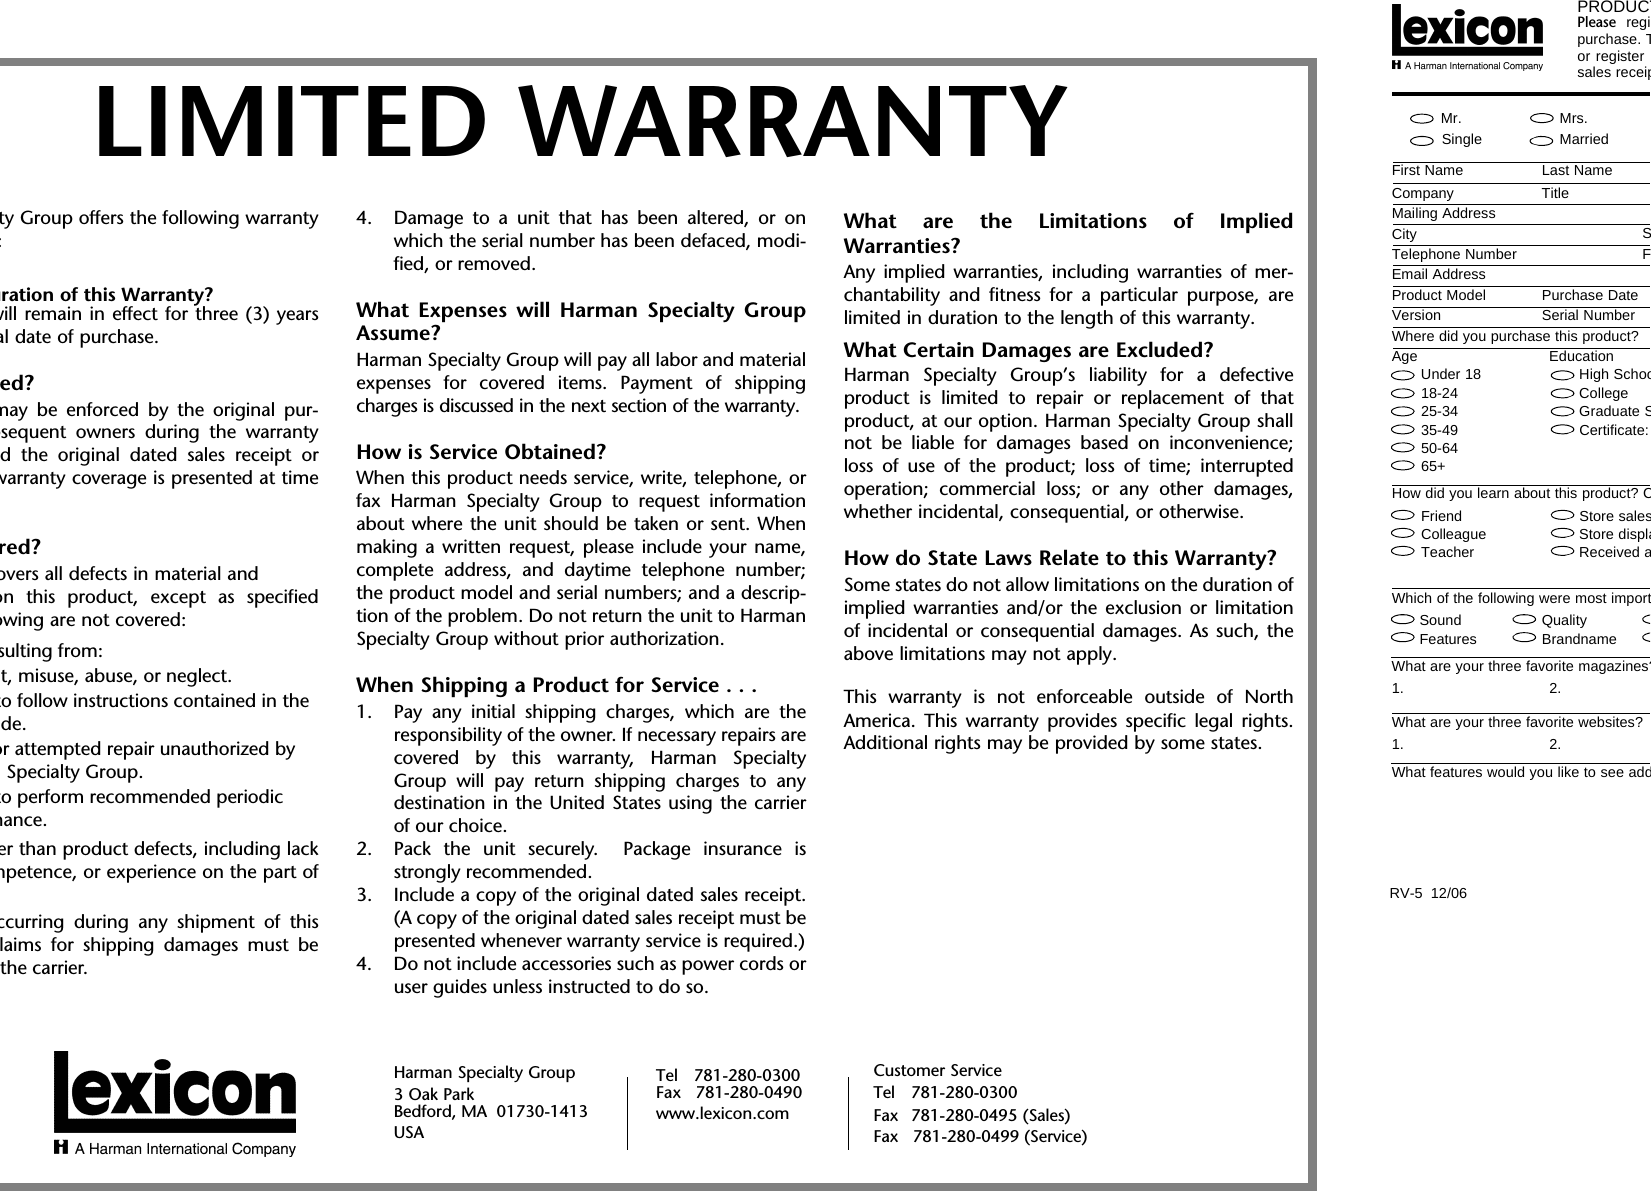 ty Group offers the following warranty:uration of this Warranty?will remain in effect for three (3) yearsal date of purchase.ed?may be enforced by the original pur-bsequent owners during the warrantyd the original dated sales receipt orwarranty coverage is presented at timered?overs all defects in material andon this product, except as specifiedowing are not covered:sulting from:t, misuse, abuse, or neglect.to follow instructions contained in the de.or attempted repair unauthorized by  Specialty Group.to perform recommended periodic nance.er than product defects, including lackmpetence, or experience on the part ofccurring during any shipment of thislaims for shipping damages must bethe carrier.4. Damage to a unit that has been altered, or onwhich the serial number has been defaced, modi-fied, or removed.What Expenses will Harman Specialty GroupAssume?Harman Specialty Group will pay all labor and materialexpenses for covered items. Payment of shippingcharges is discussed in the next section of the warranty.How is Service Obtained?When this product needs service, write, telephone, orfax Harman Specialty Group to request informationabout where the unit should be taken or sent. Whenmaking a written request, please include your name,complete address, and daytime telephone number;the product model and serial numbers; and a descrip-tion of the problem. Do not return the unit to HarmanSpecialty Group without prior authorization.When Shipping a Product for Service . . .1. Pay any initial shipping charges, which are theresponsibility of the owner. If necessary repairs arecovered by this warranty, Harman SpecialtyGroup will pay return shipping charges to anydestination in the United States using the carrierof our choice.2. Pack the unit securely.  Package insurance isstrongly recommended.3. Include a copy of the original dated sales receipt.(A copy of the original dated sales receipt must bepresented whenever warranty service is required.)4. Do not include accessories such as power cords oruser guides unless instructed to do so.What are the Limitations of ImpliedWarranties?Any implied warranties, including warranties of mer-chantability and fitness for a particular purpose, arelimited in duration to the length of this warranty.What Certain Damages are Excluded?Harman Specialty Group’s liability for a defectiveproduct is limited to repair or replacement of thatproduct, at our option. Harman Specialty Group shallnot be liable for damages based on inconvenience;loss of use of the product; loss of time; interruptedoperation; commercial loss; or any other damages,whether incidental, consequential, or otherwise.How do State Laws Relate to this Warranty?Some states do not allow limitations on the duration ofimplied warranties and/or the exclusion or limitationof incidental or consequential damages. As such, theabove limitations may not apply. This warranty is not enforceable outside of NorthAmerica. This warranty provides specific legal rights.Additional rights may be provided by some states.PRODUCTPlease regipurchase. Tor register sales receip           Mr.     Mrs.     Single     MarriedFirst Name Last NameCompany TitleMailing AddressCitySTelephone NumberFEmail AddressProduct Model Purchase DateVersion Serial NumberWhere did you purchase this product?Age EducationUnder 18 High Schoo18-24 College25-34 Graduate S35-49 Certificate:50-6465+How did you learn about this product? CFriend Store salesColleague Store displaTeacher Received aWhich of the following were most importSound QualityFeatures BrandnameWhat are your three favorite magazines?1. 2.What are your three favorite websites?1. 2.What features would you like to see addRV-5  12/06LIMITED WARRANTYHarman Specialty Group3 Oak ParkBedford, MA  01730-1413 USACustomer ServiceTel 781-280-0300Fax 781-280-0495 (Sales)Fax   781-280-0499 (Service)Tel 781-280-0300Fax   781-280-0490www.lexicon.com